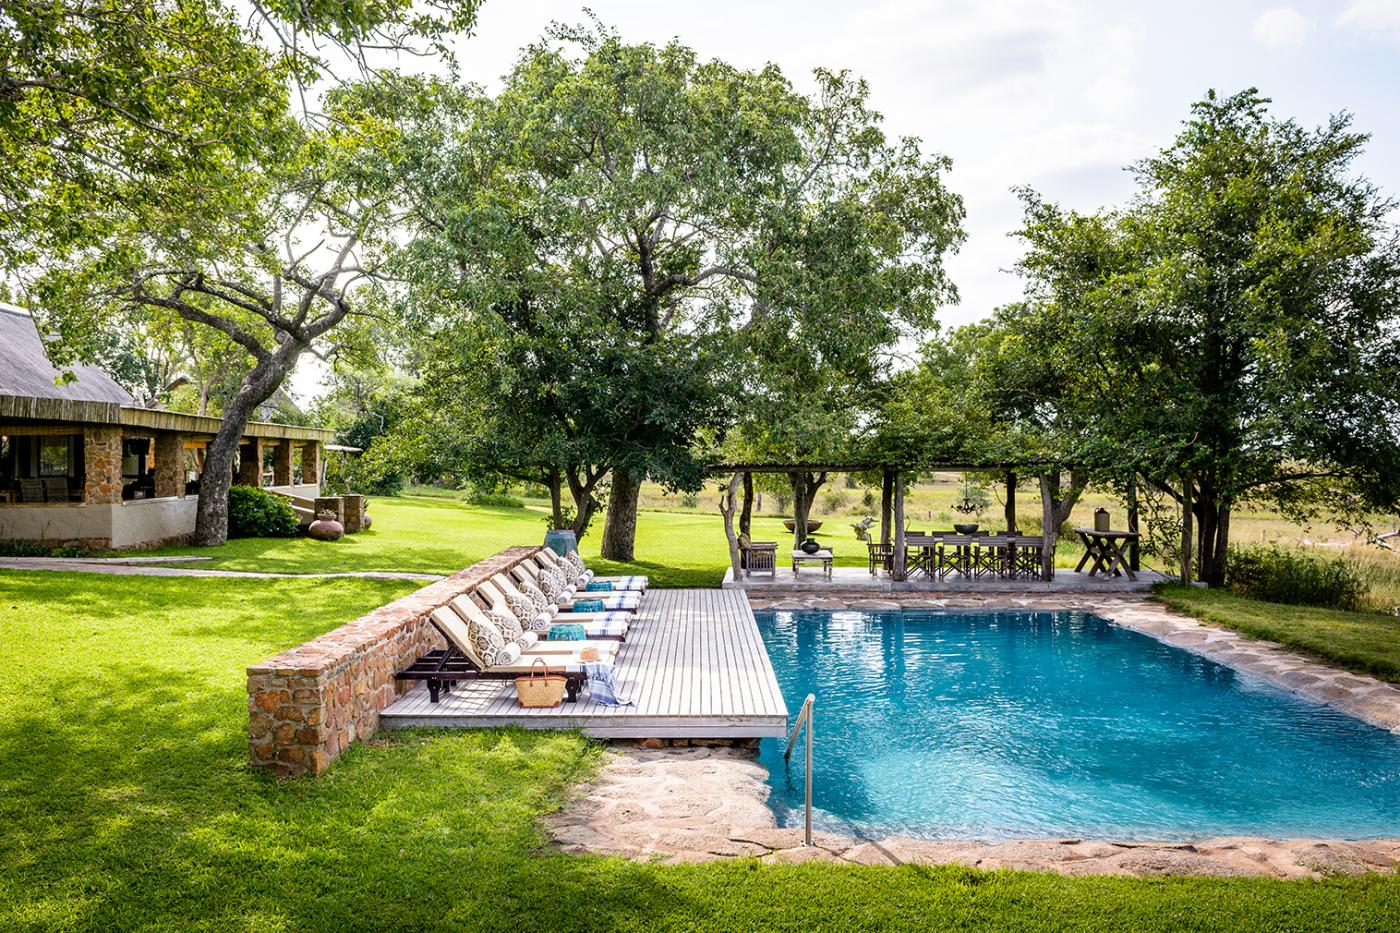 If you are planning an amazing birthday pool party, Singita Castleton in South Africa is the place to go.